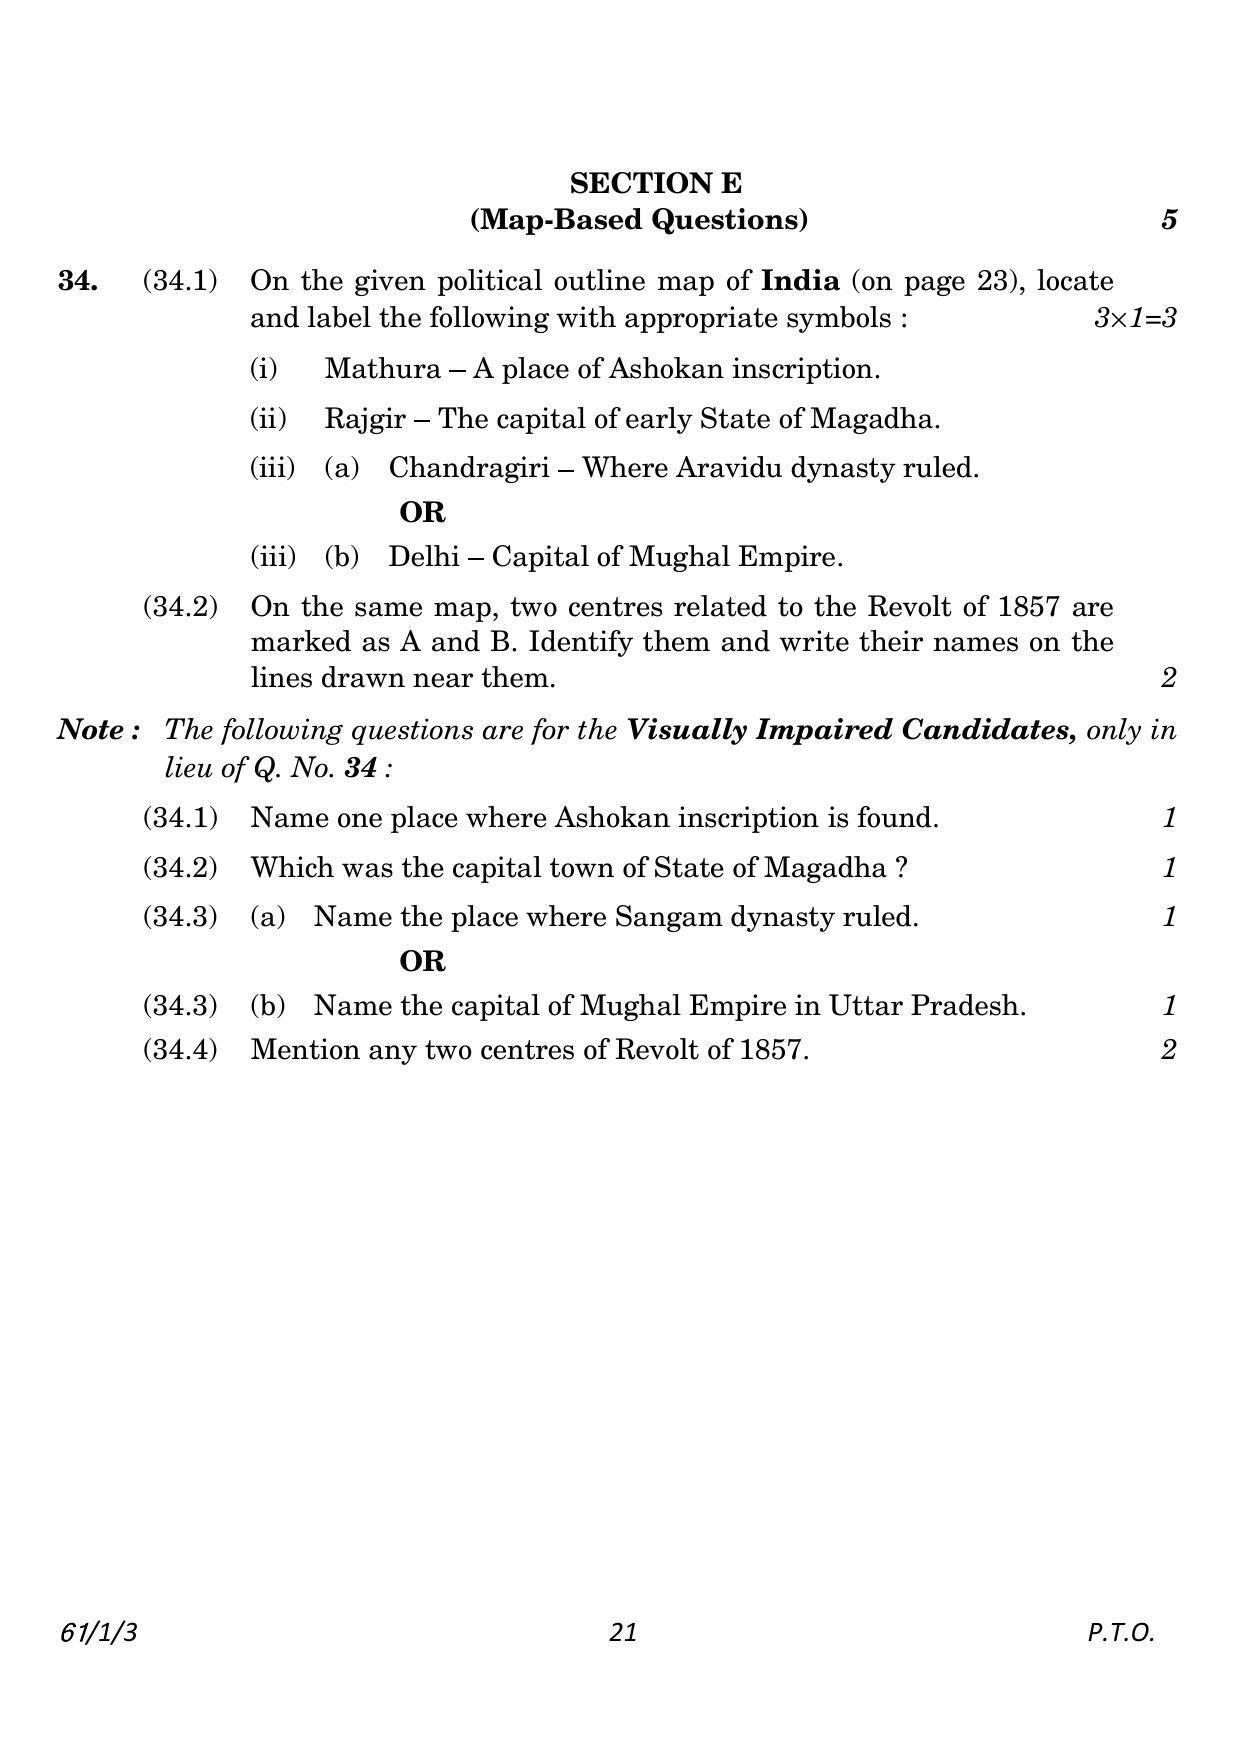 CBSE Class 12 61-1-3 History 2023 Question Paper - Page 21